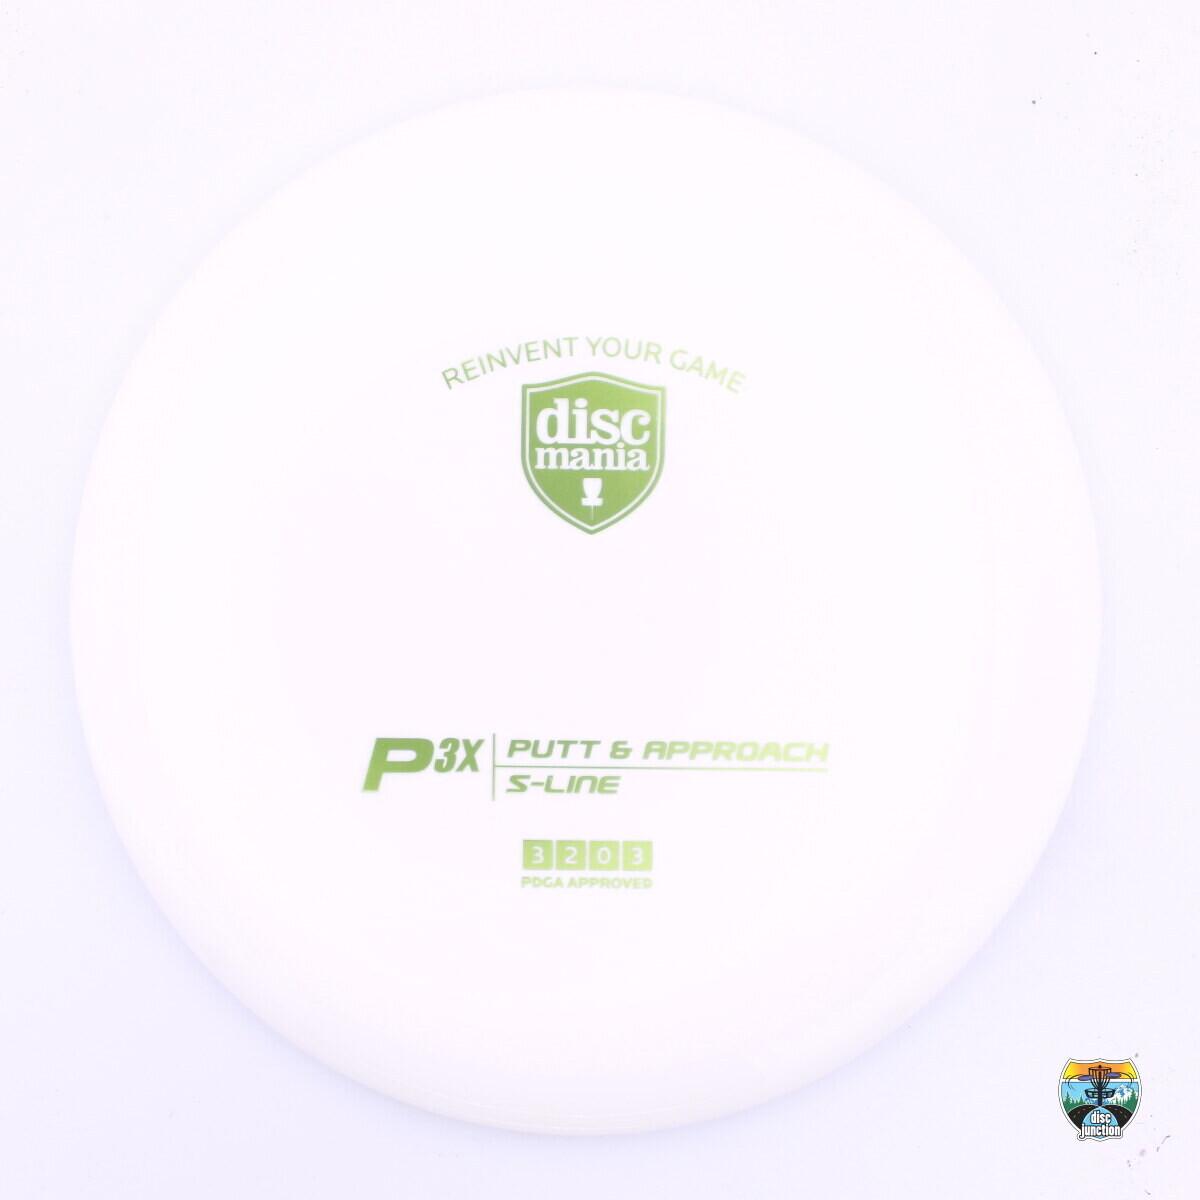 Discmania S-Line P3x, Manufacturer Weight Range: 173-176 Grams, Color: White, Serial Number: 0172-0026